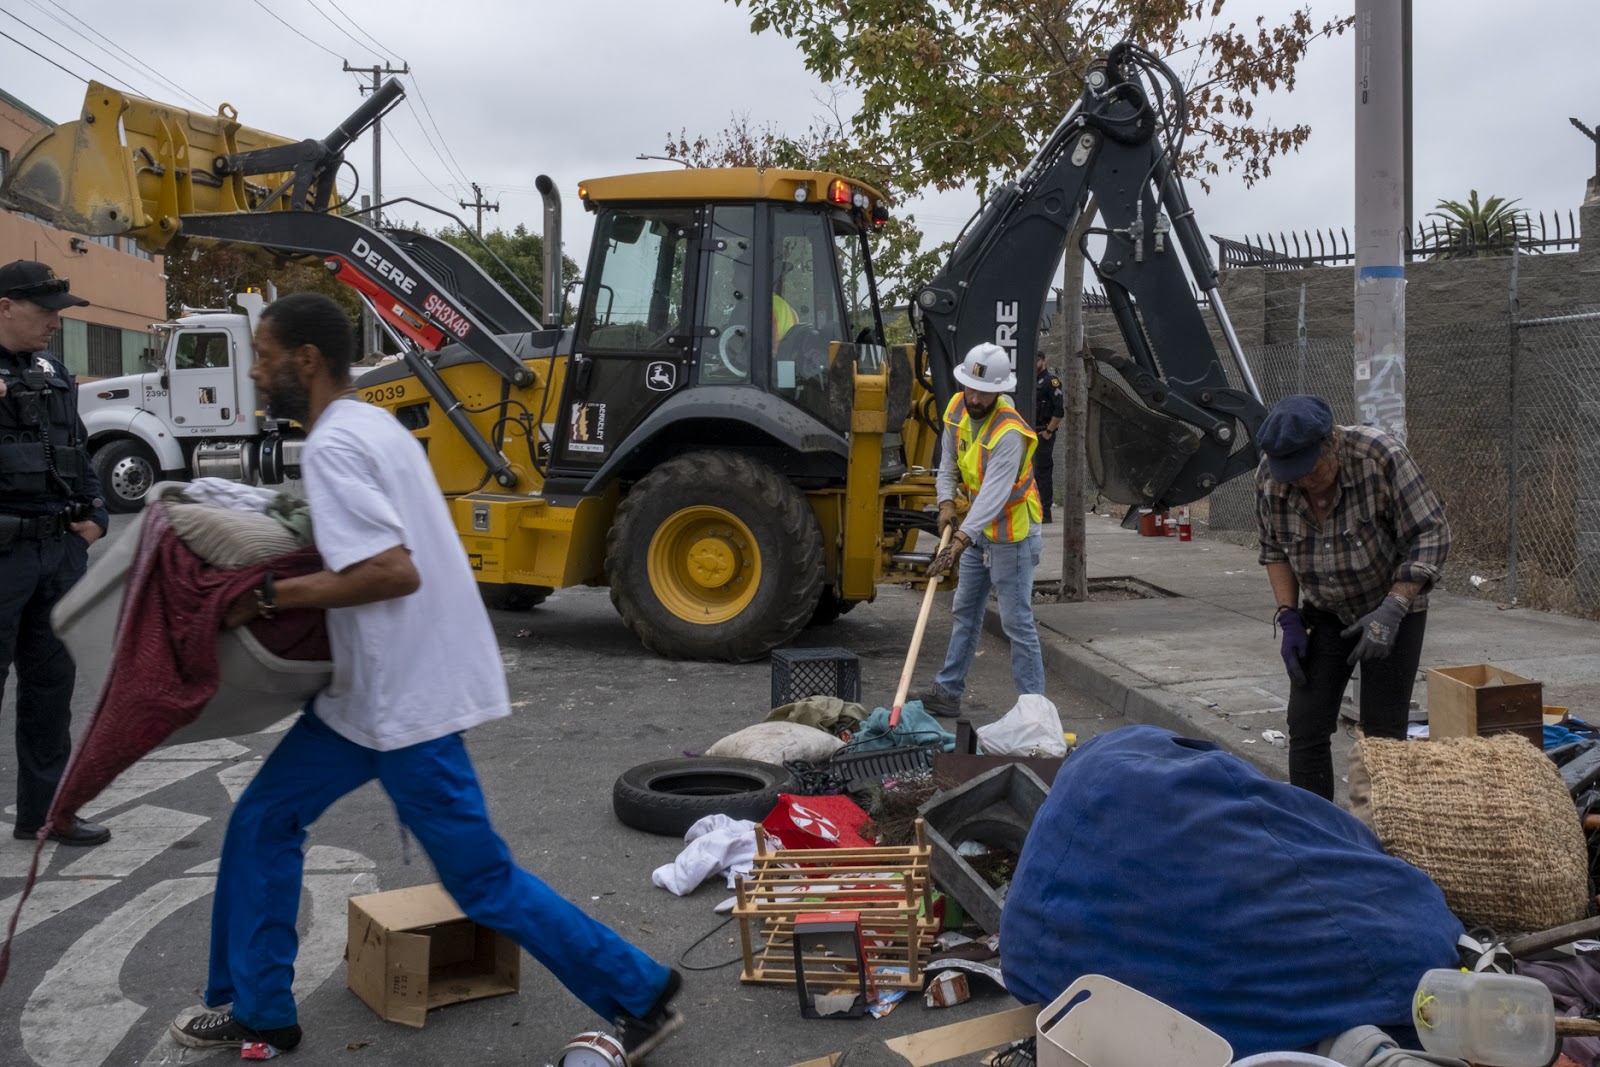 Galtney rushes to retrieve items from a pile being swept by assistant to the city manager, Peter Radu, October 4, 2022. (Yesica Prado, SF Public Press)